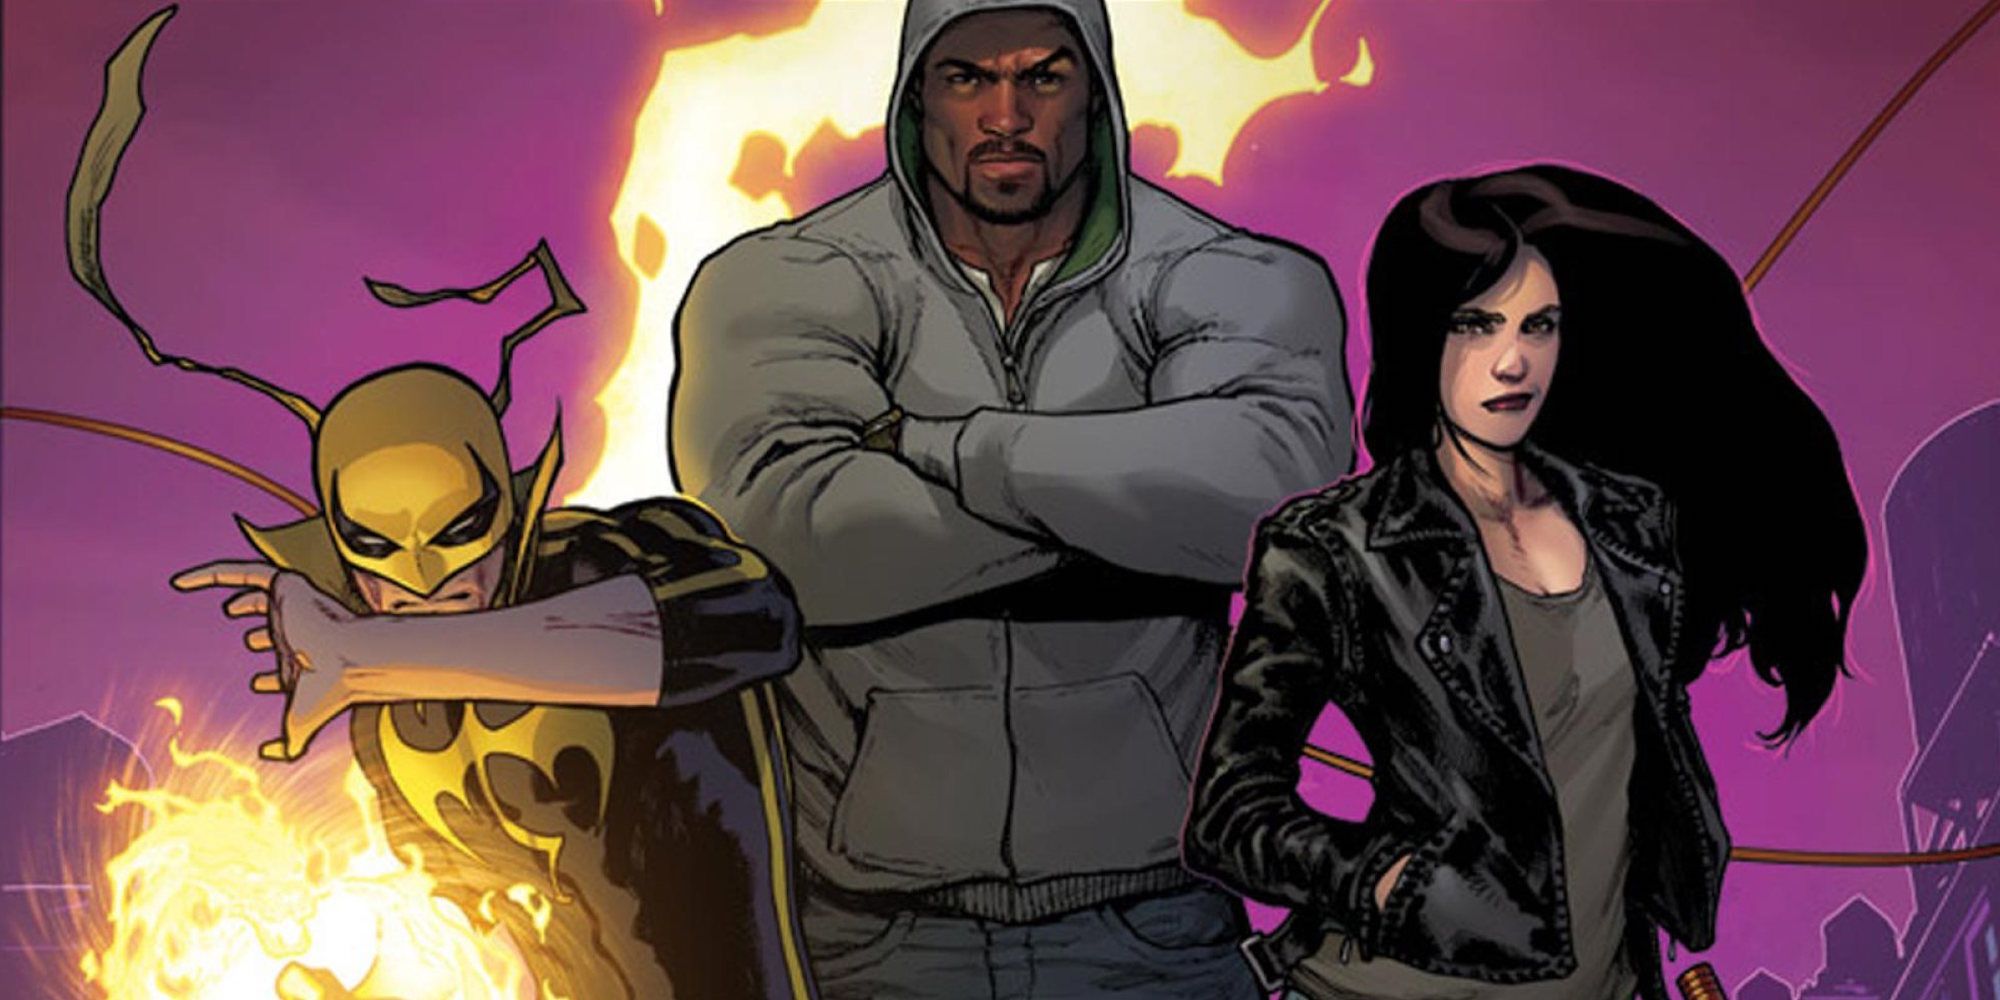 The Defenders Comic from Marvel with Iron Fist, Luke Cage, and Jessica Jones